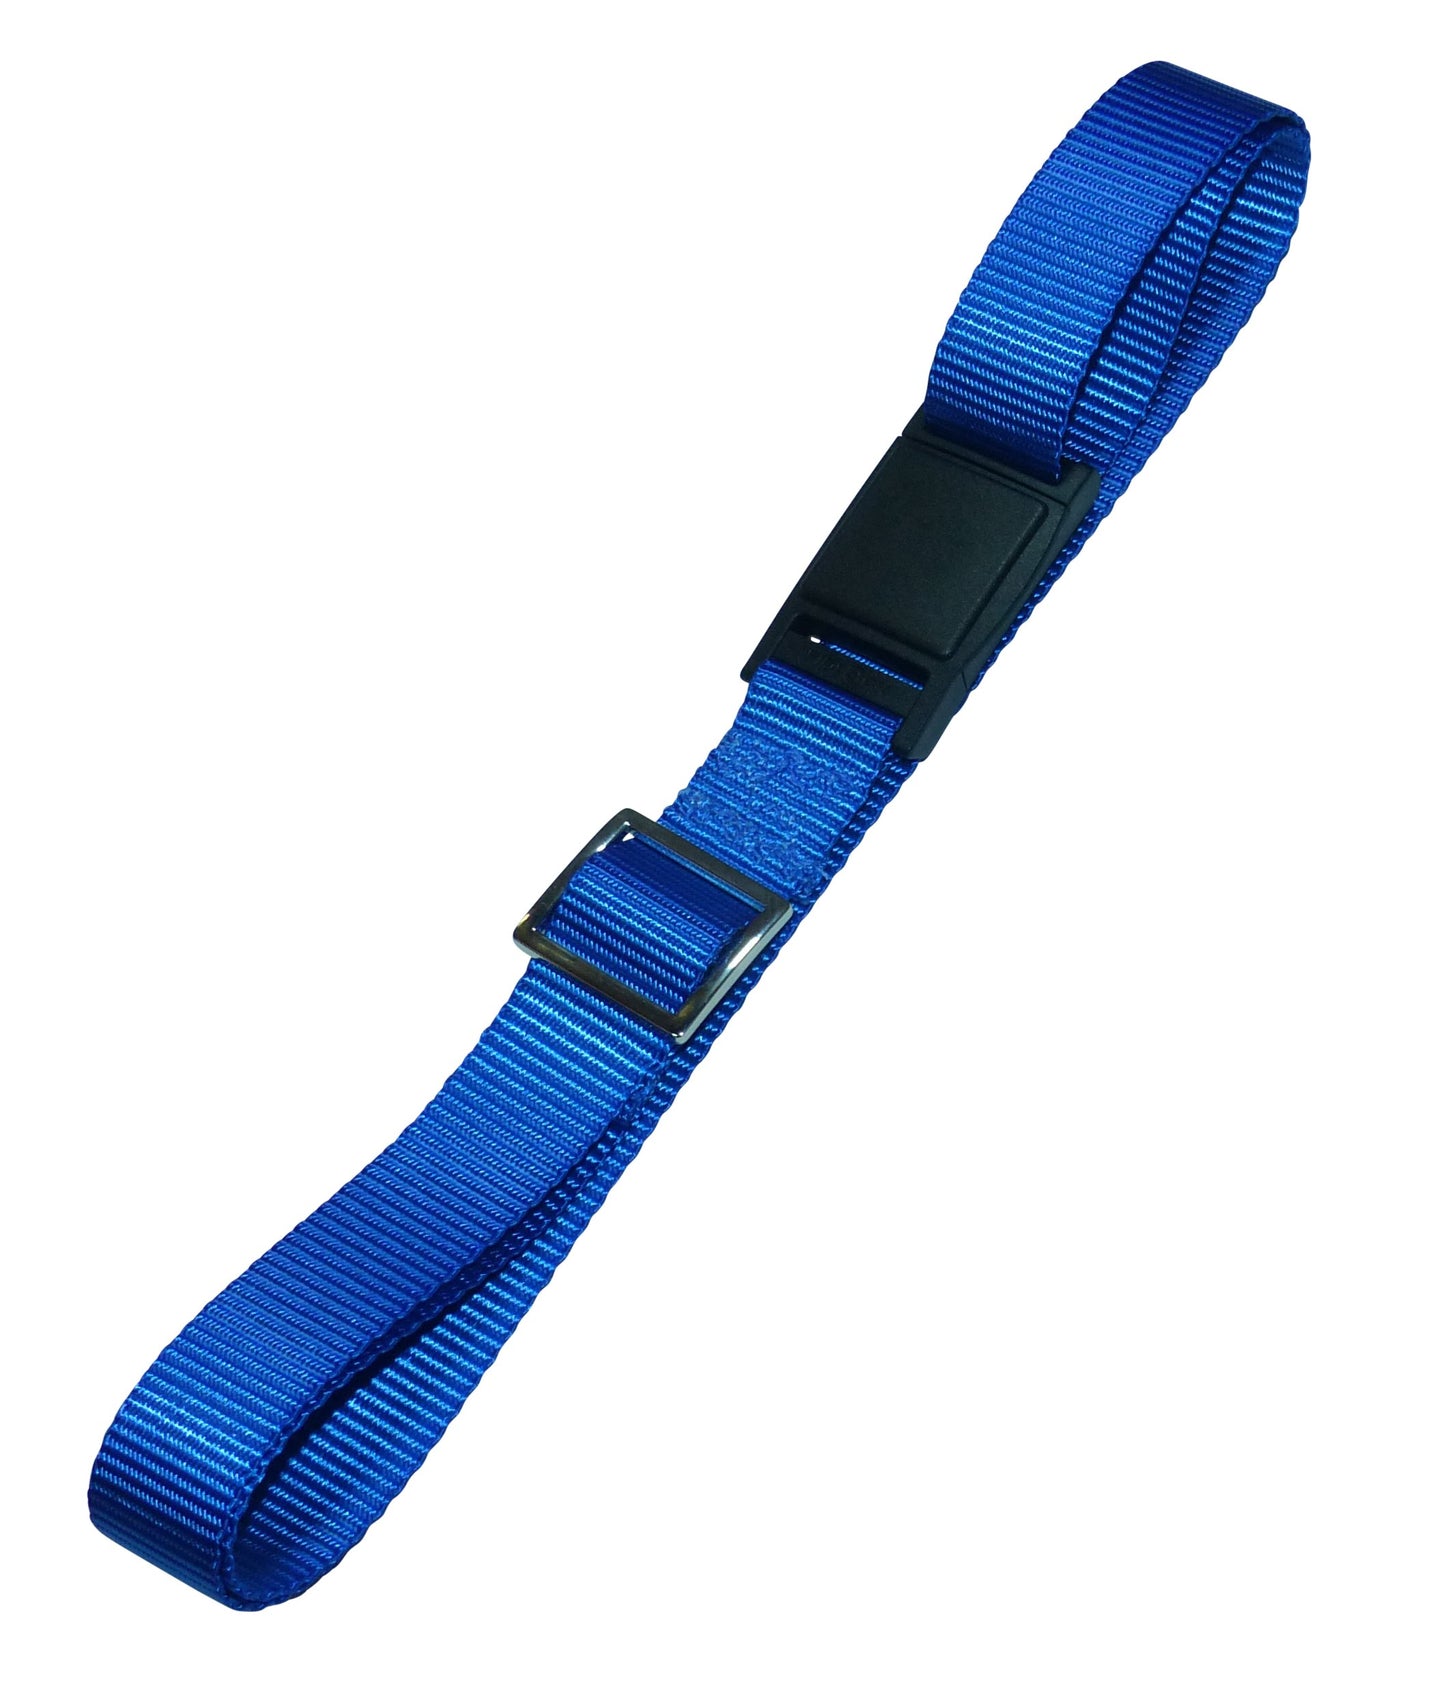 Benristraps 25mm Strap with Fidlock Quick Release & Length-Adjusting Buckles (Pair) in blue